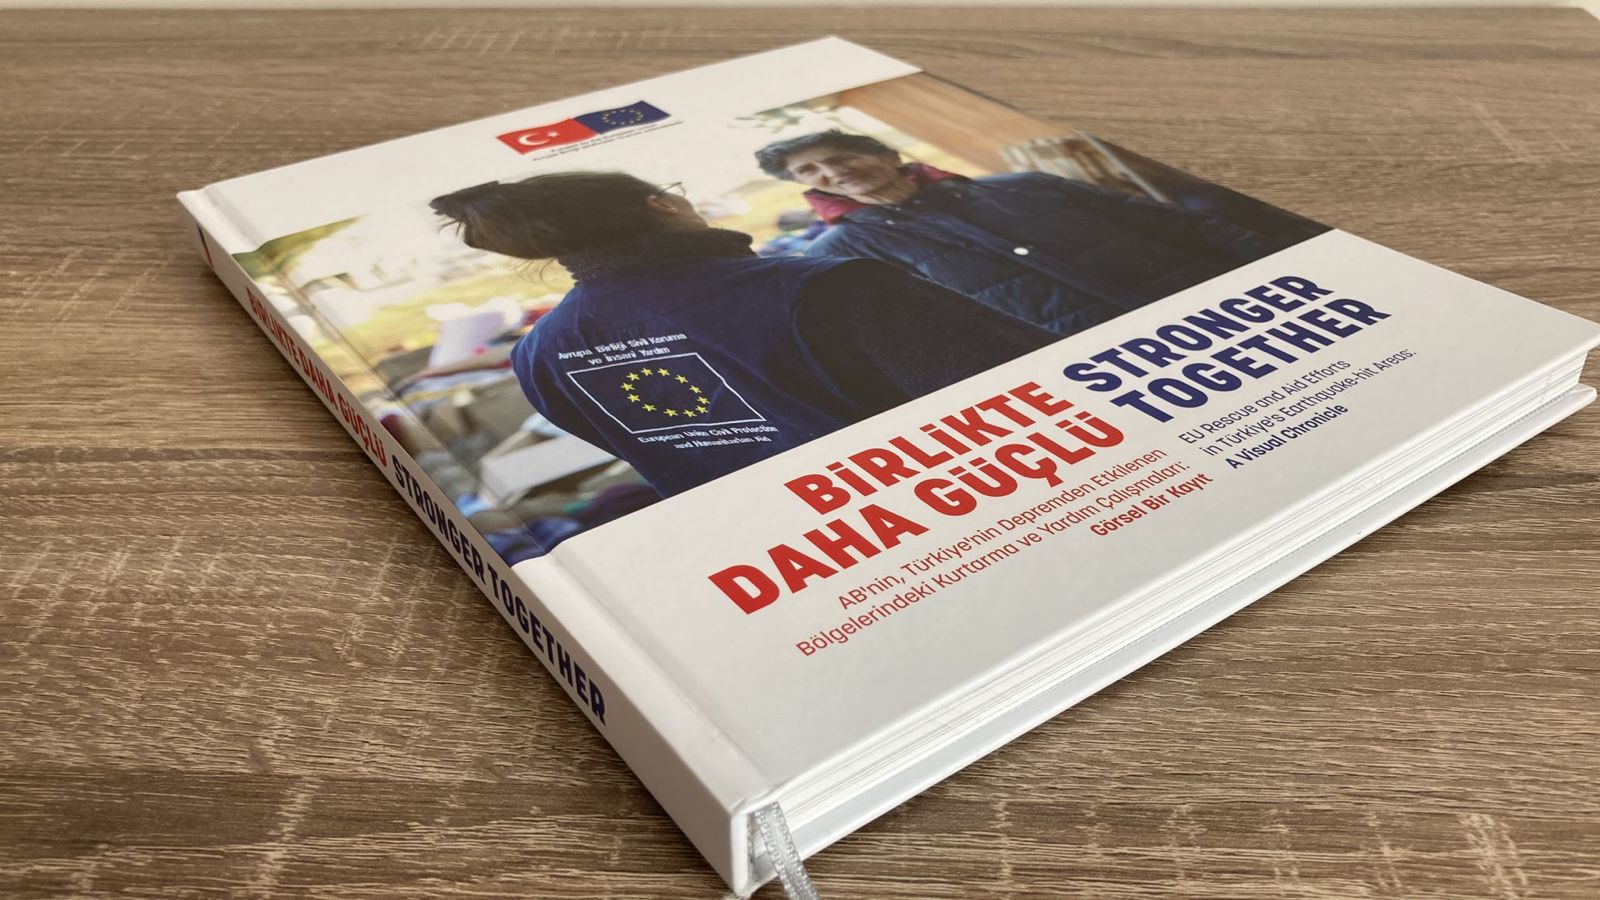 A Photo Book on the EU-Turkish Solidarity in the Aftermath of the Earthquakes